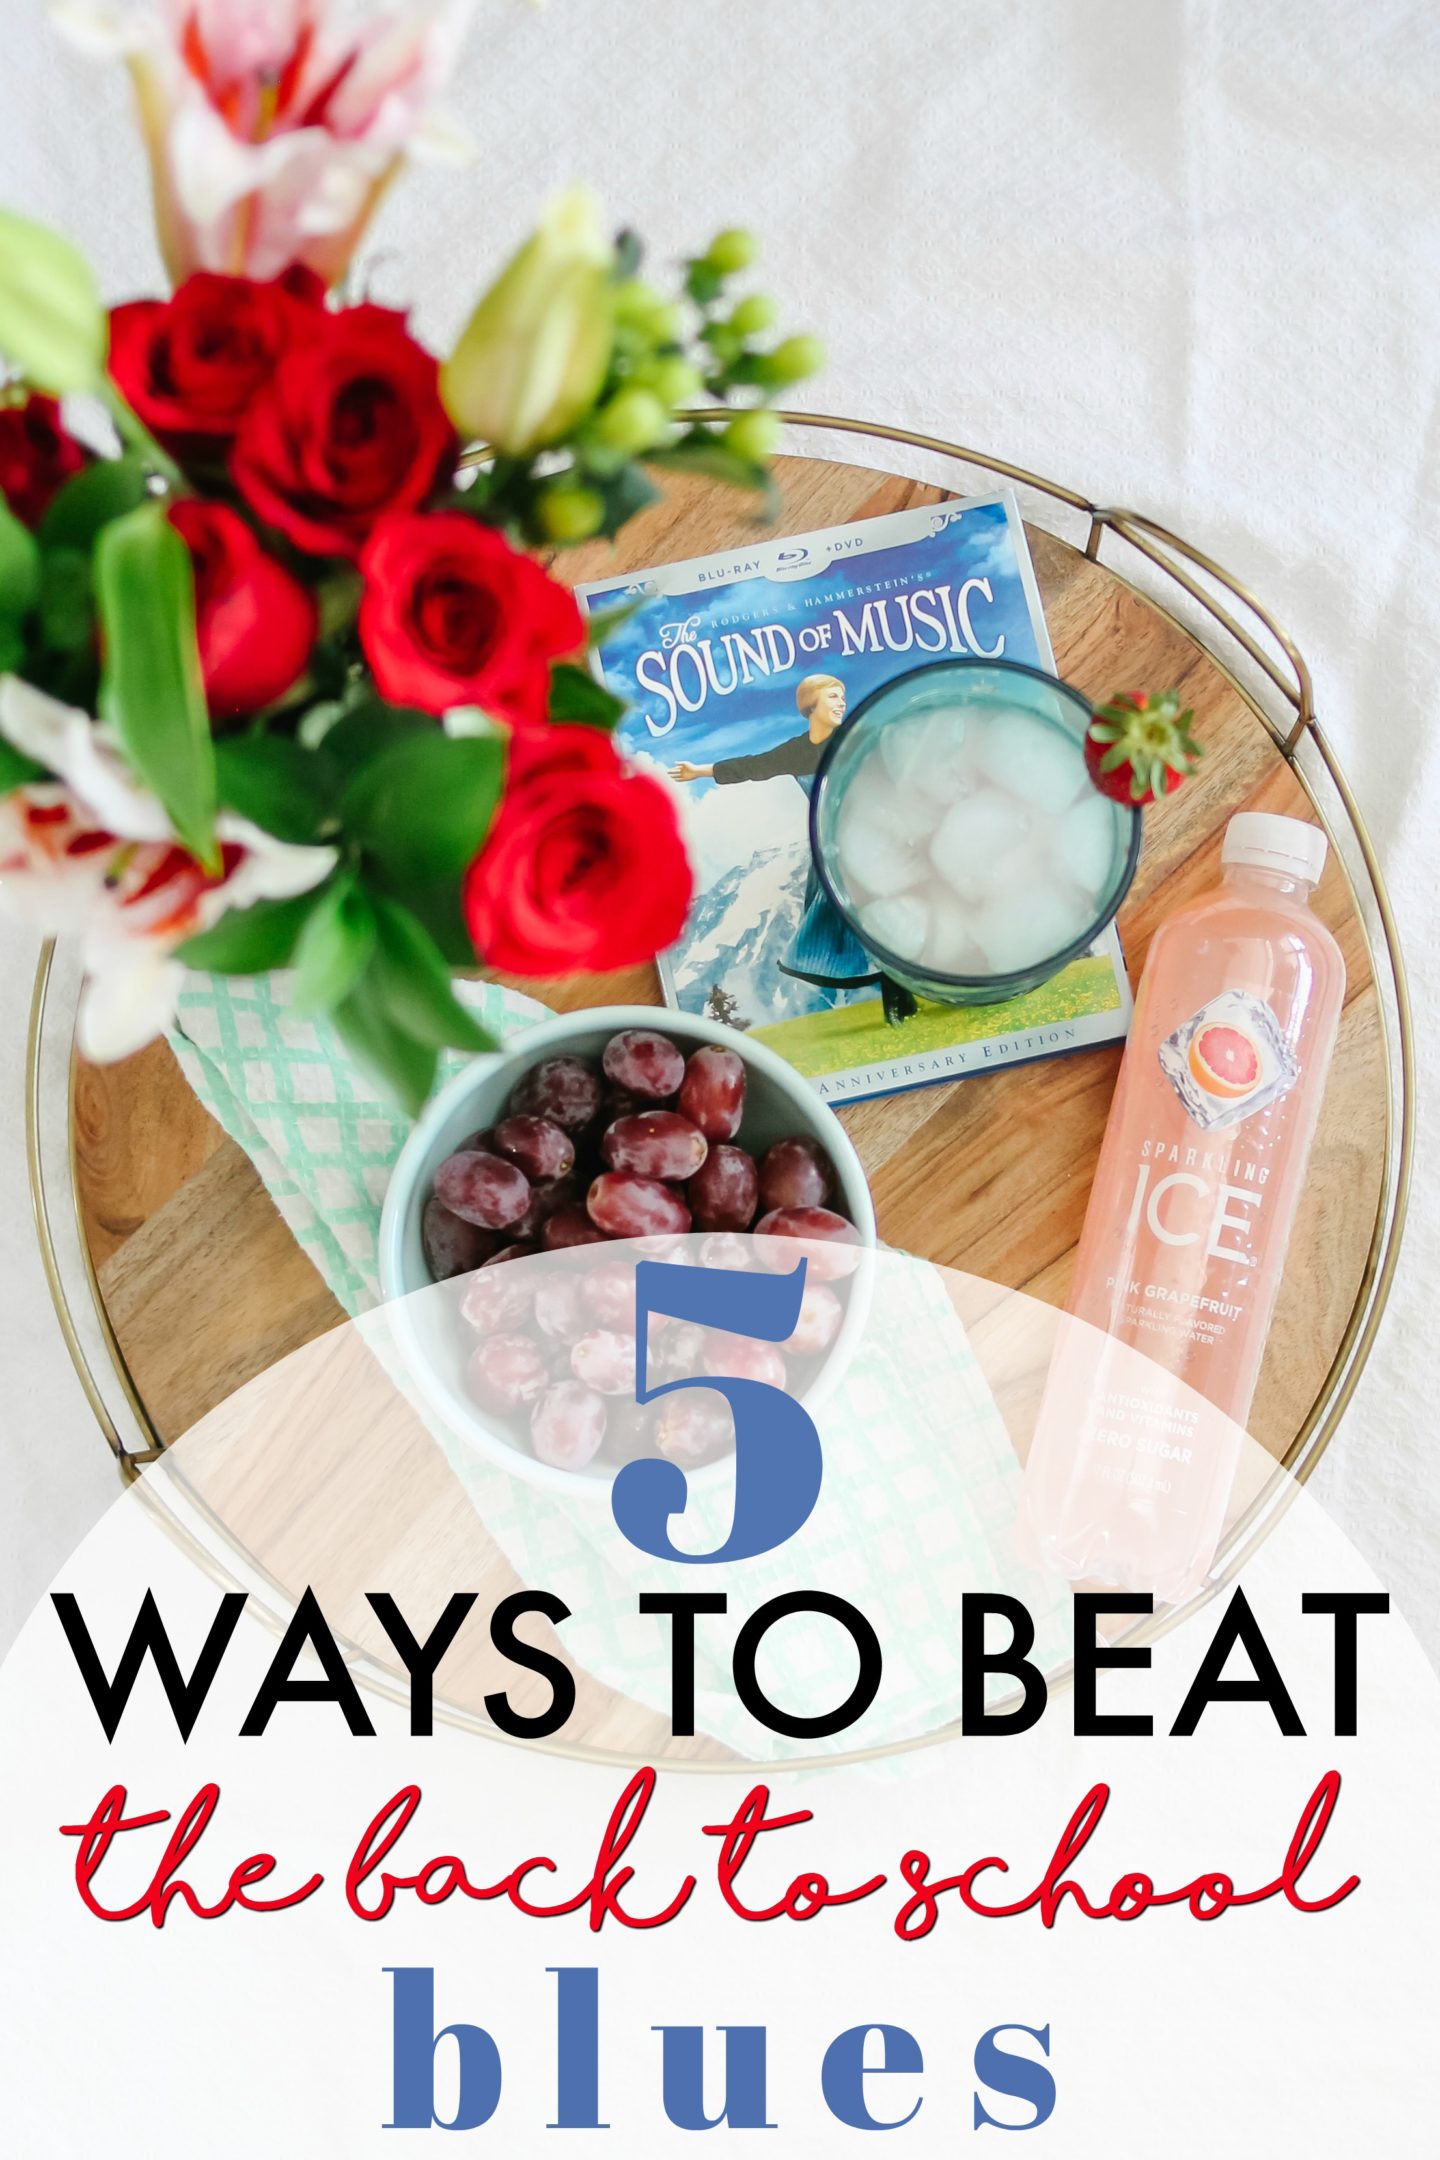 5 ways to beat the back to school blues! Easy ways to perk you and your kids up this season!